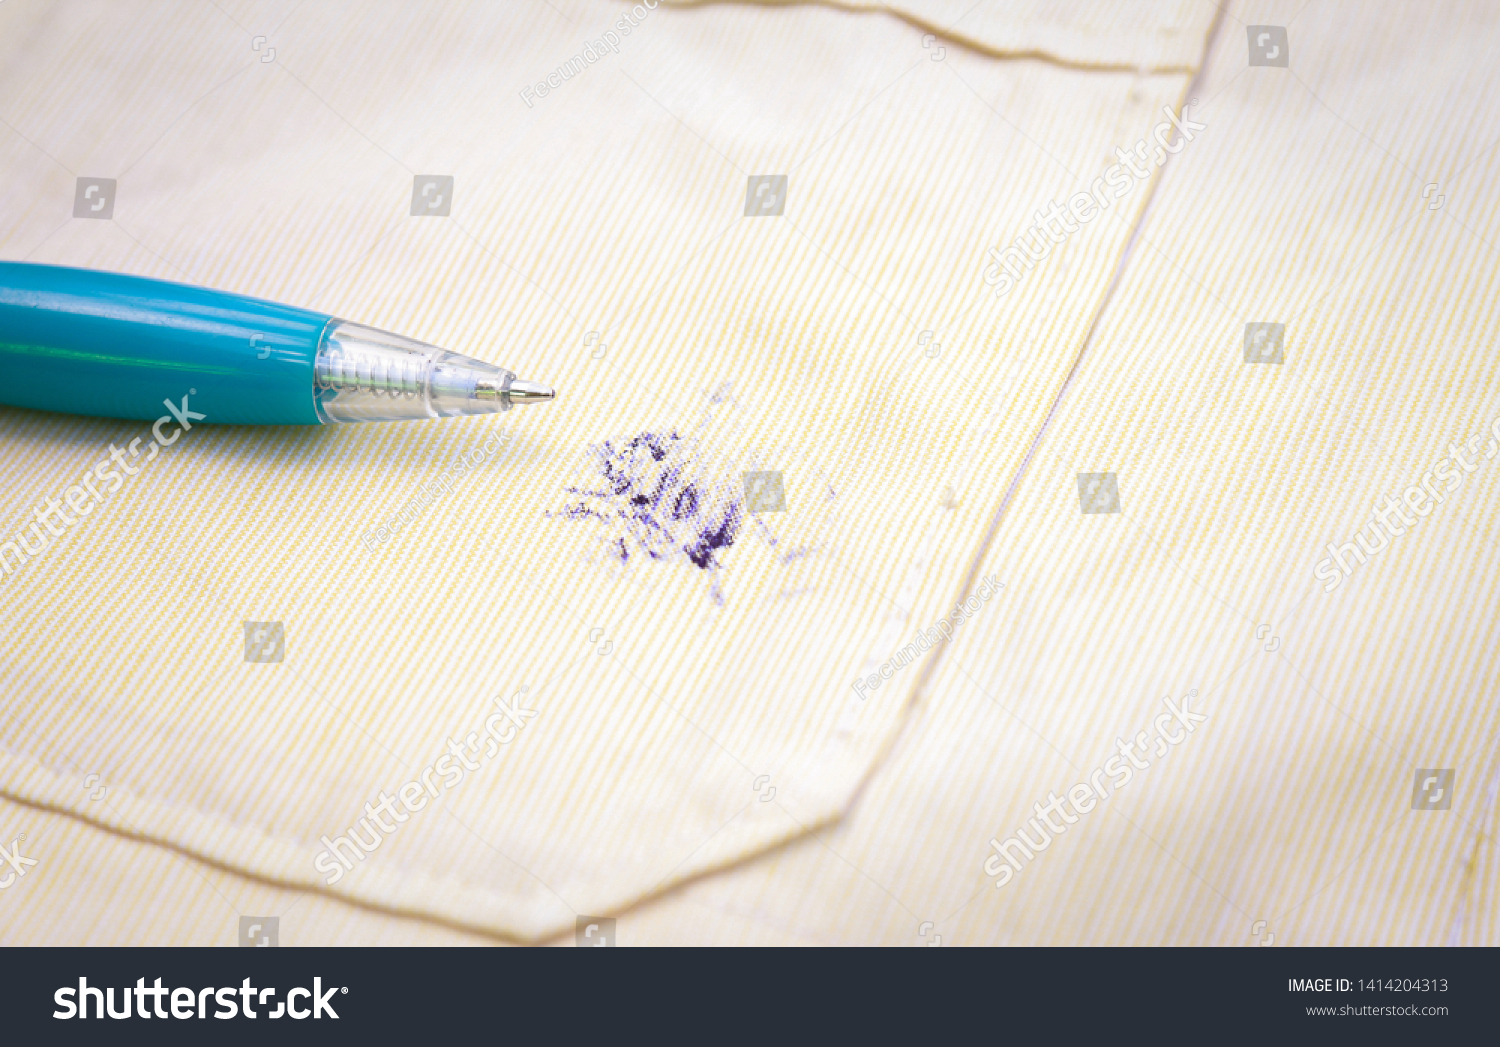 Dirty ink pen stain on fabric from accident in daily life. dirt stains for cleaning work house  #1414204313